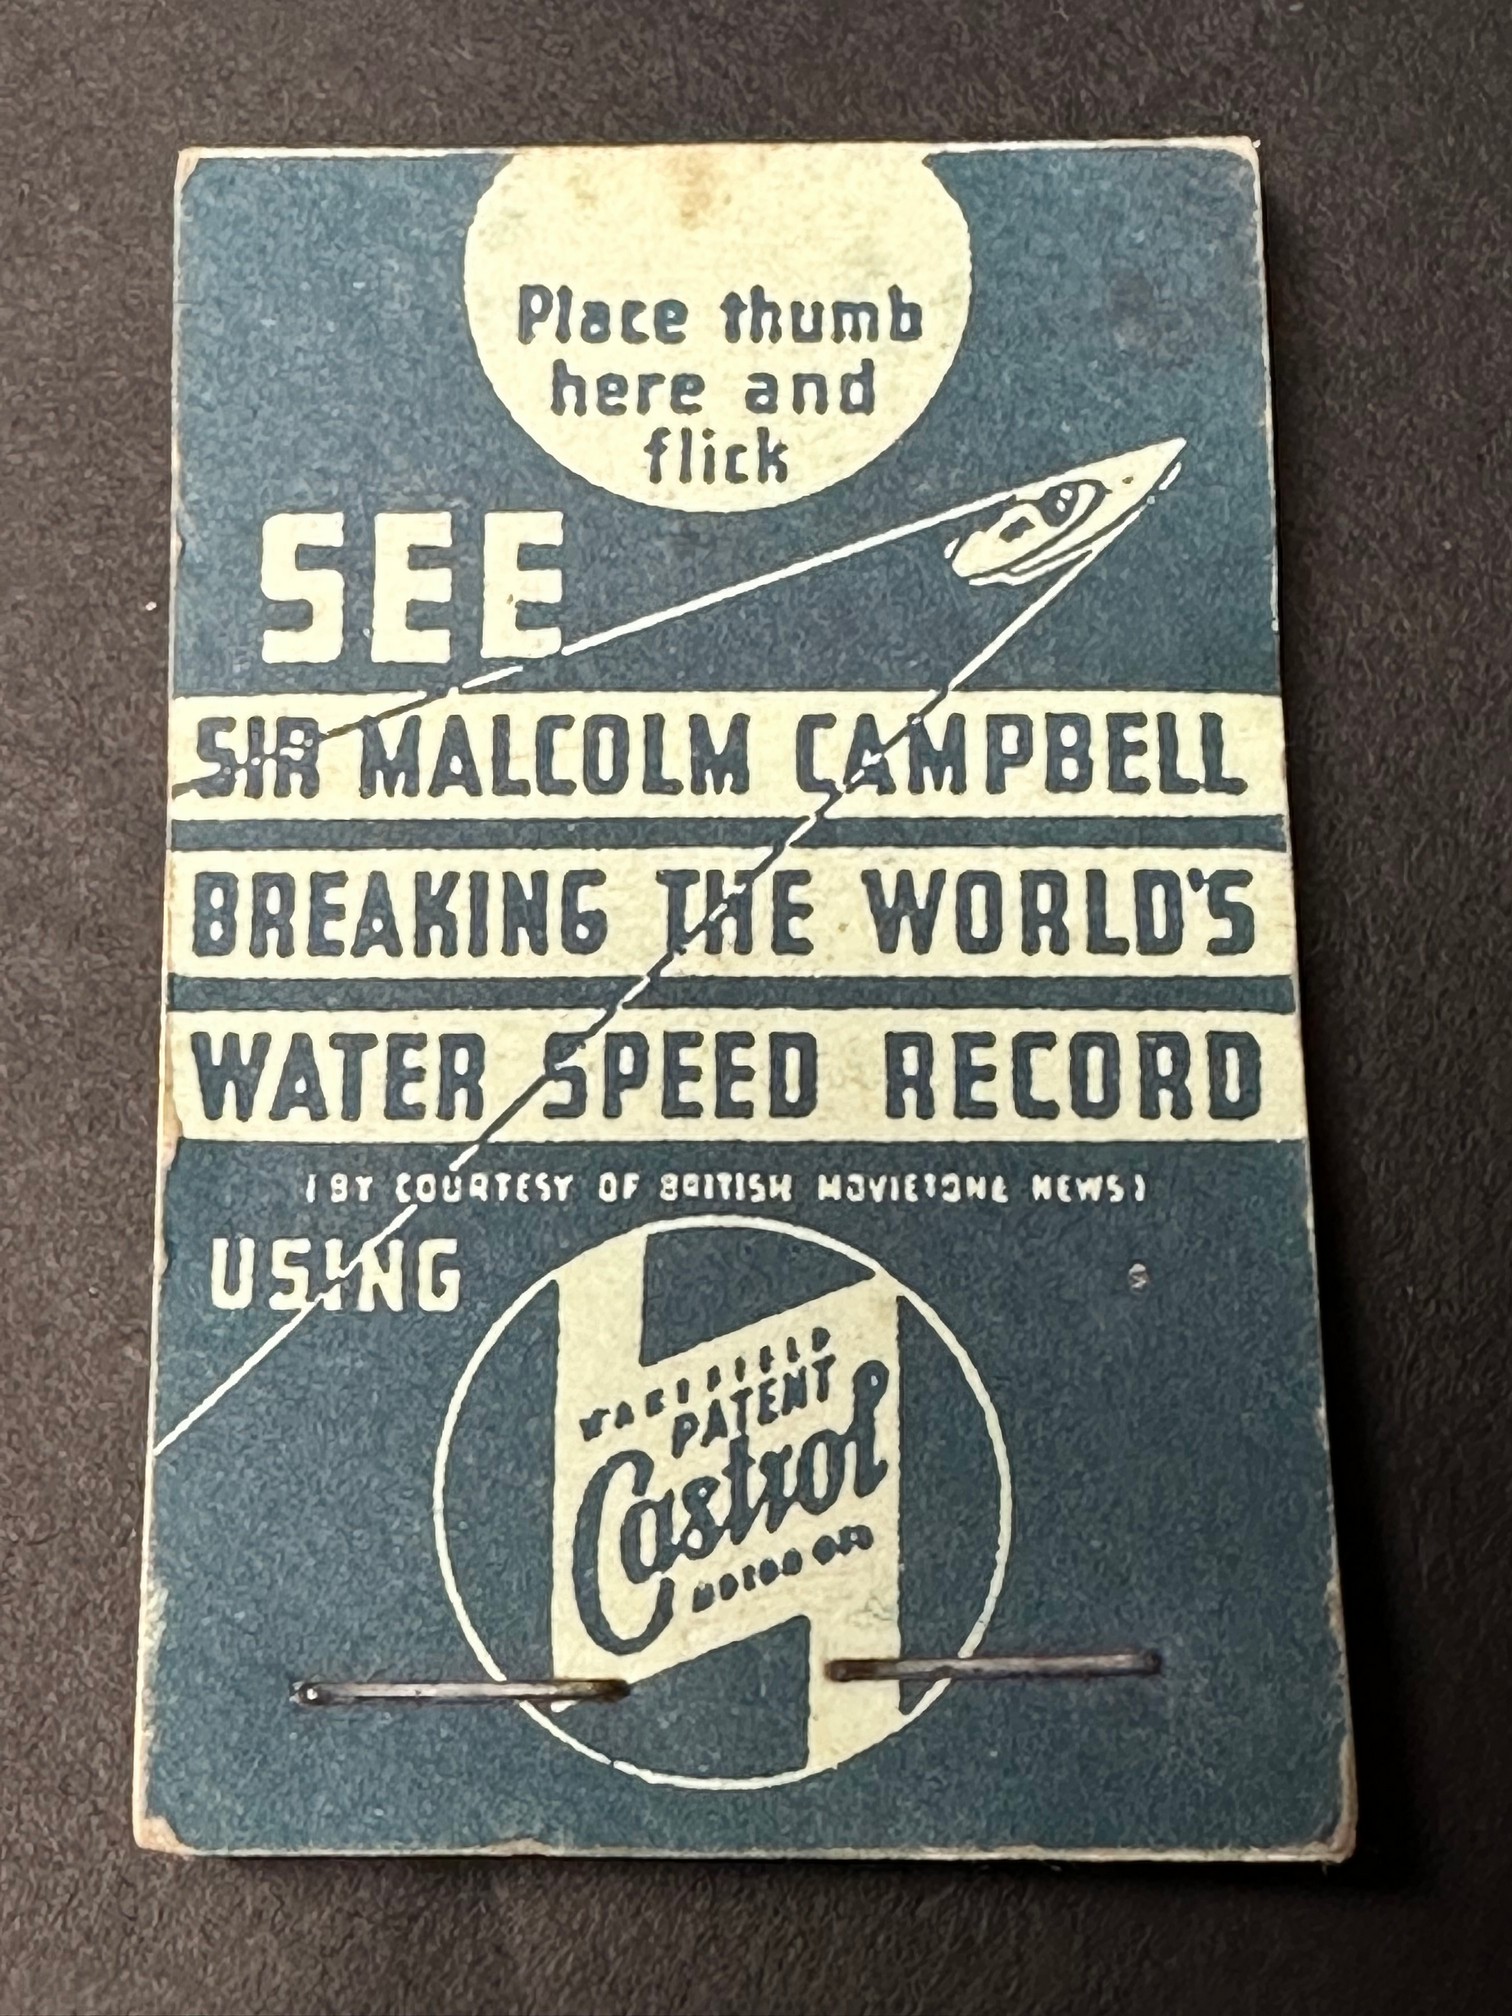 A Wakefield Castrol flick book 'Sir Malcolm Campbell breaking the world's water speed record'.